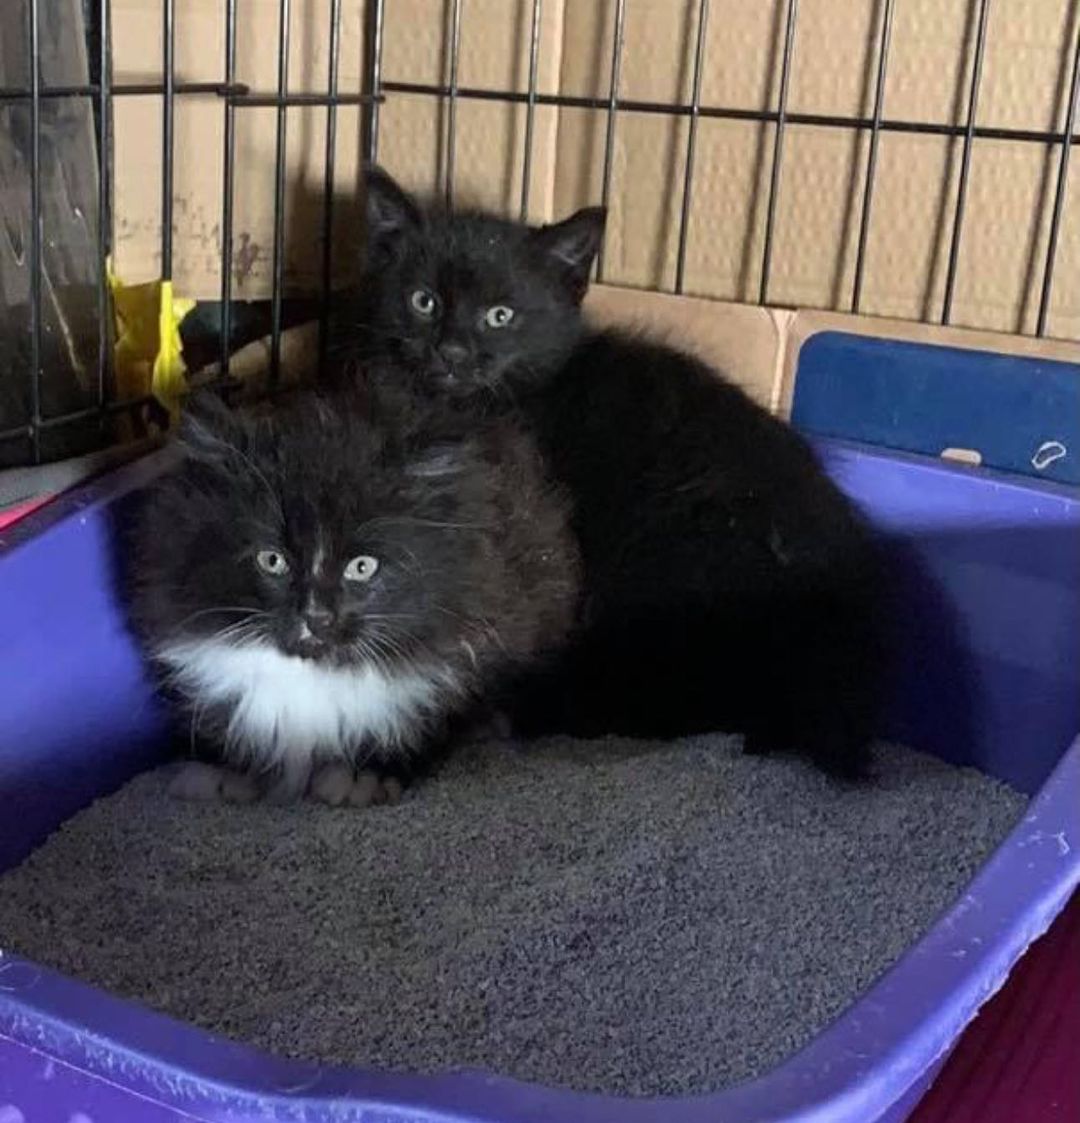 Welcome these timid babies - Raven, Robin and Roufous 🦅🐈‍⬛🐈‍⬛🐈‍⬛